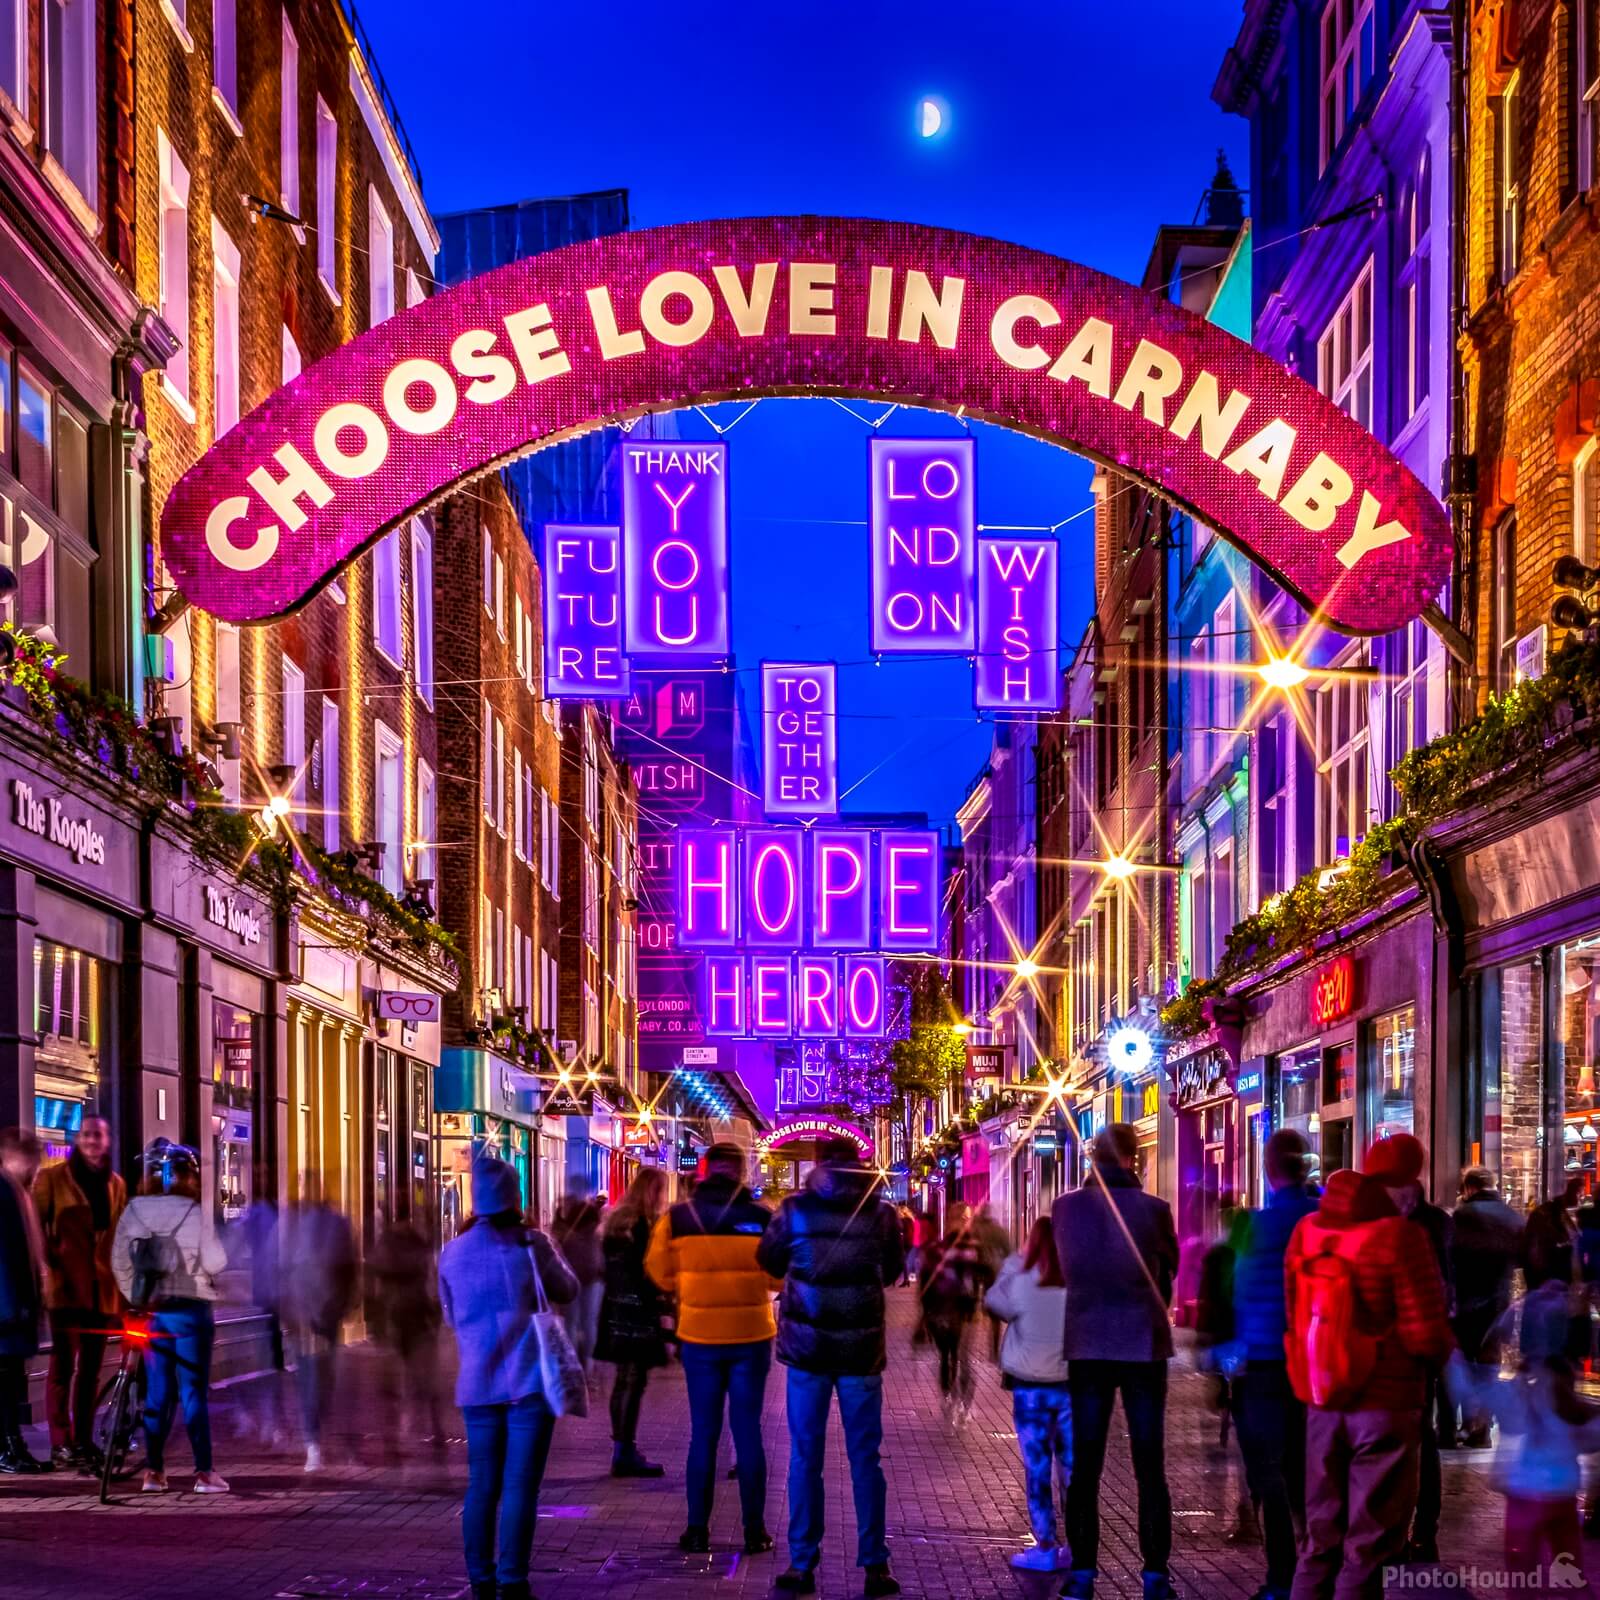 Image of Carnaby Street by Doug Stratton